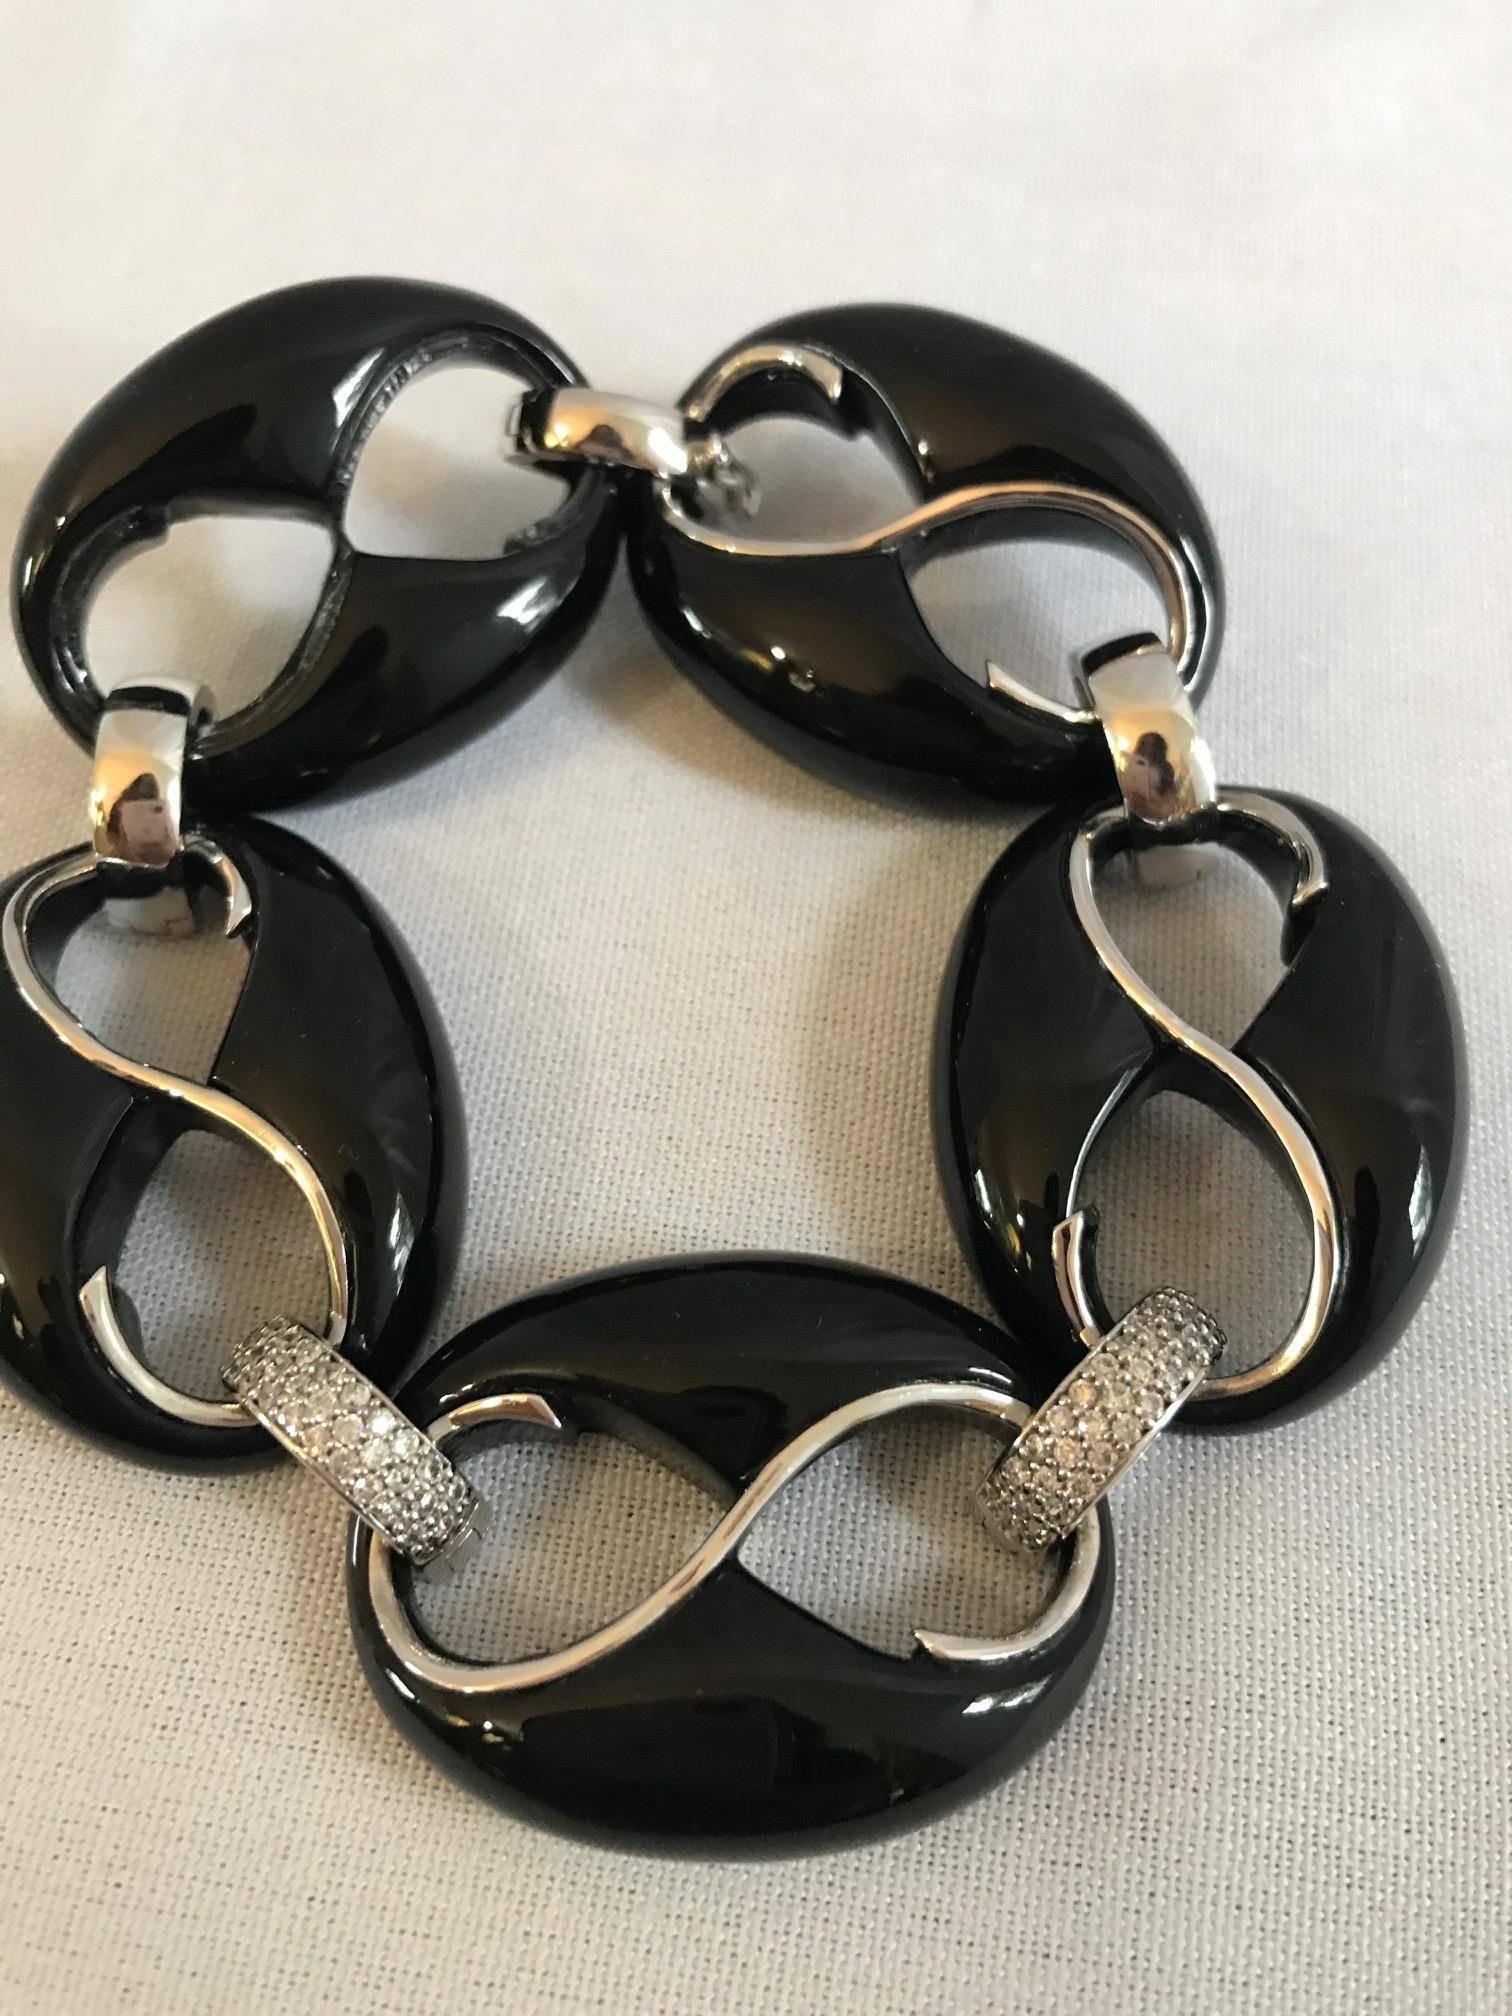 Jingle bells. A beautiful Cristina Sabatini silver and crystal encrusted bracelet. A great way to ring in the holiday. This is a stunning accessory to any outfit! A beautiful contrast in color.
  